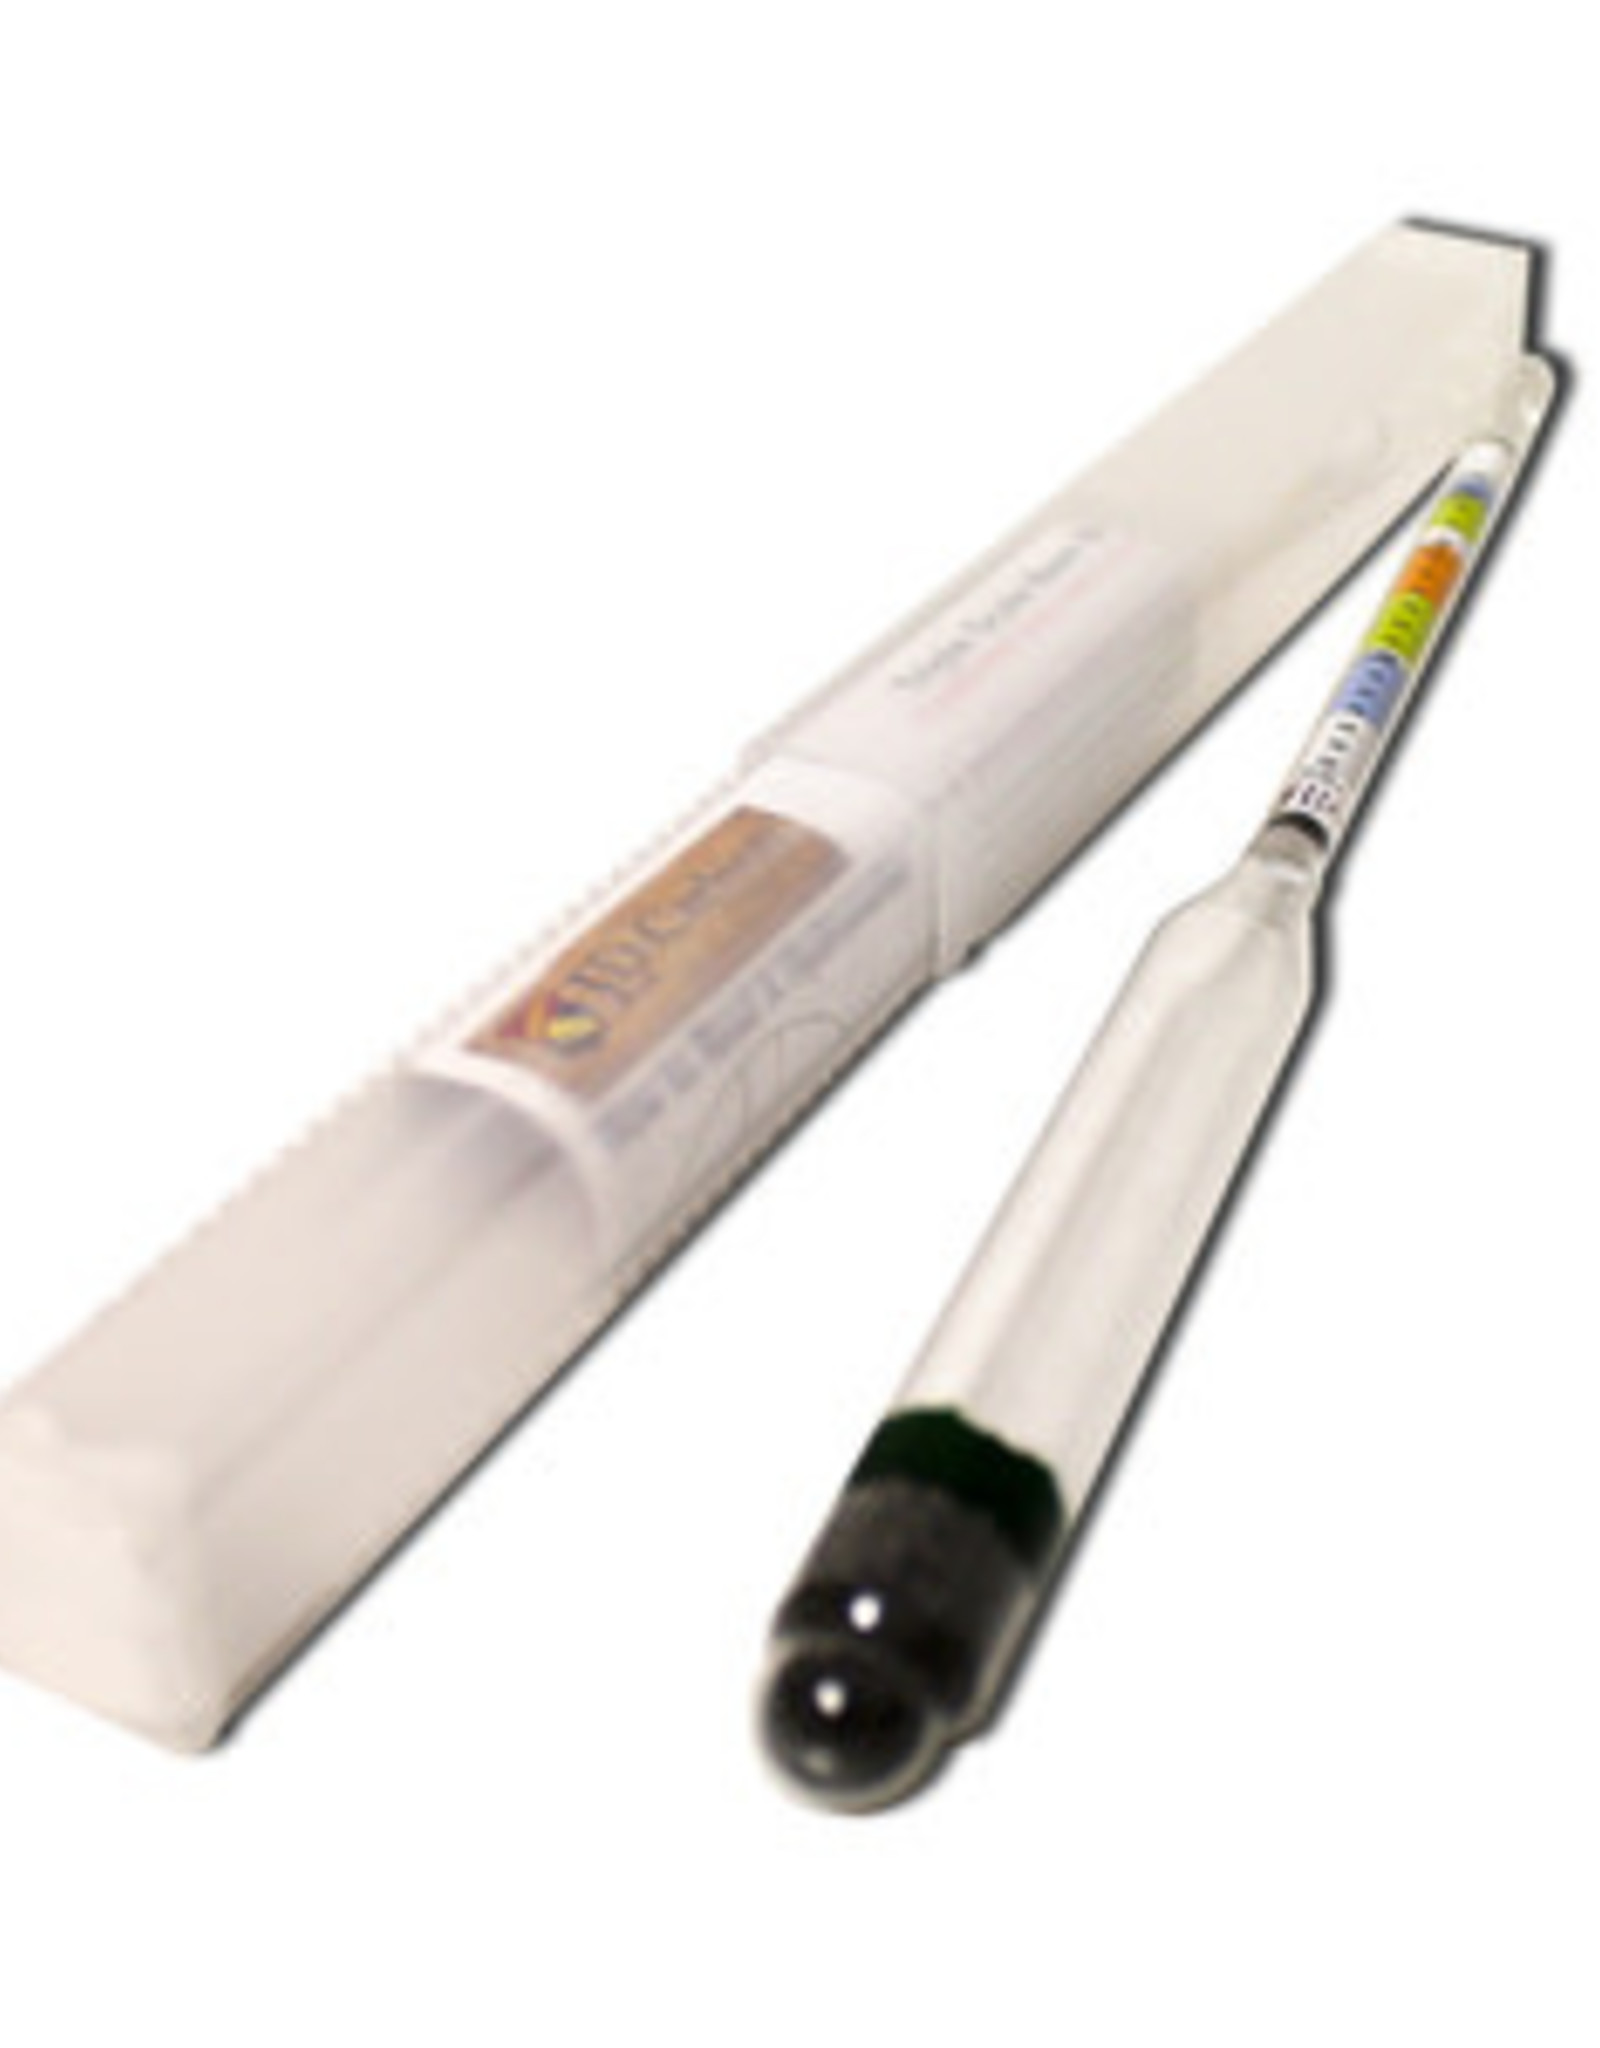 TRIPLE SCALE HYDROMETER WITH HARD PACK CASE